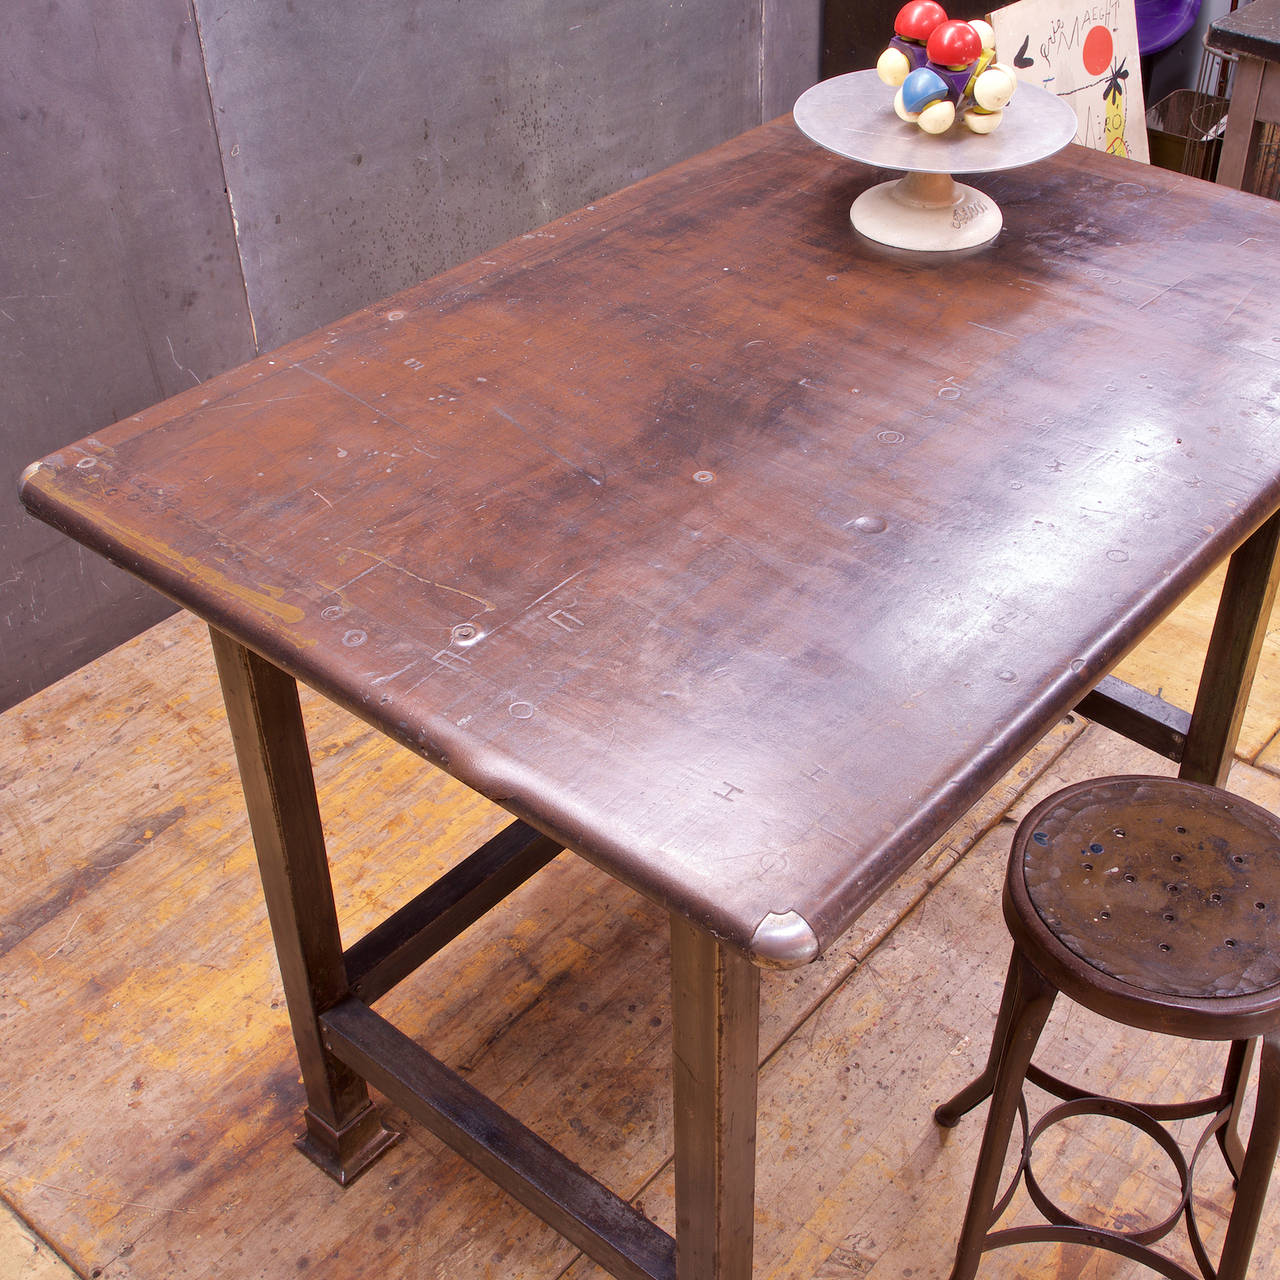 1910s Industrial Rustic Farmhouse Arborists Steel Table Drafting Work Island In Distressed Condition In Hyattsville, MD